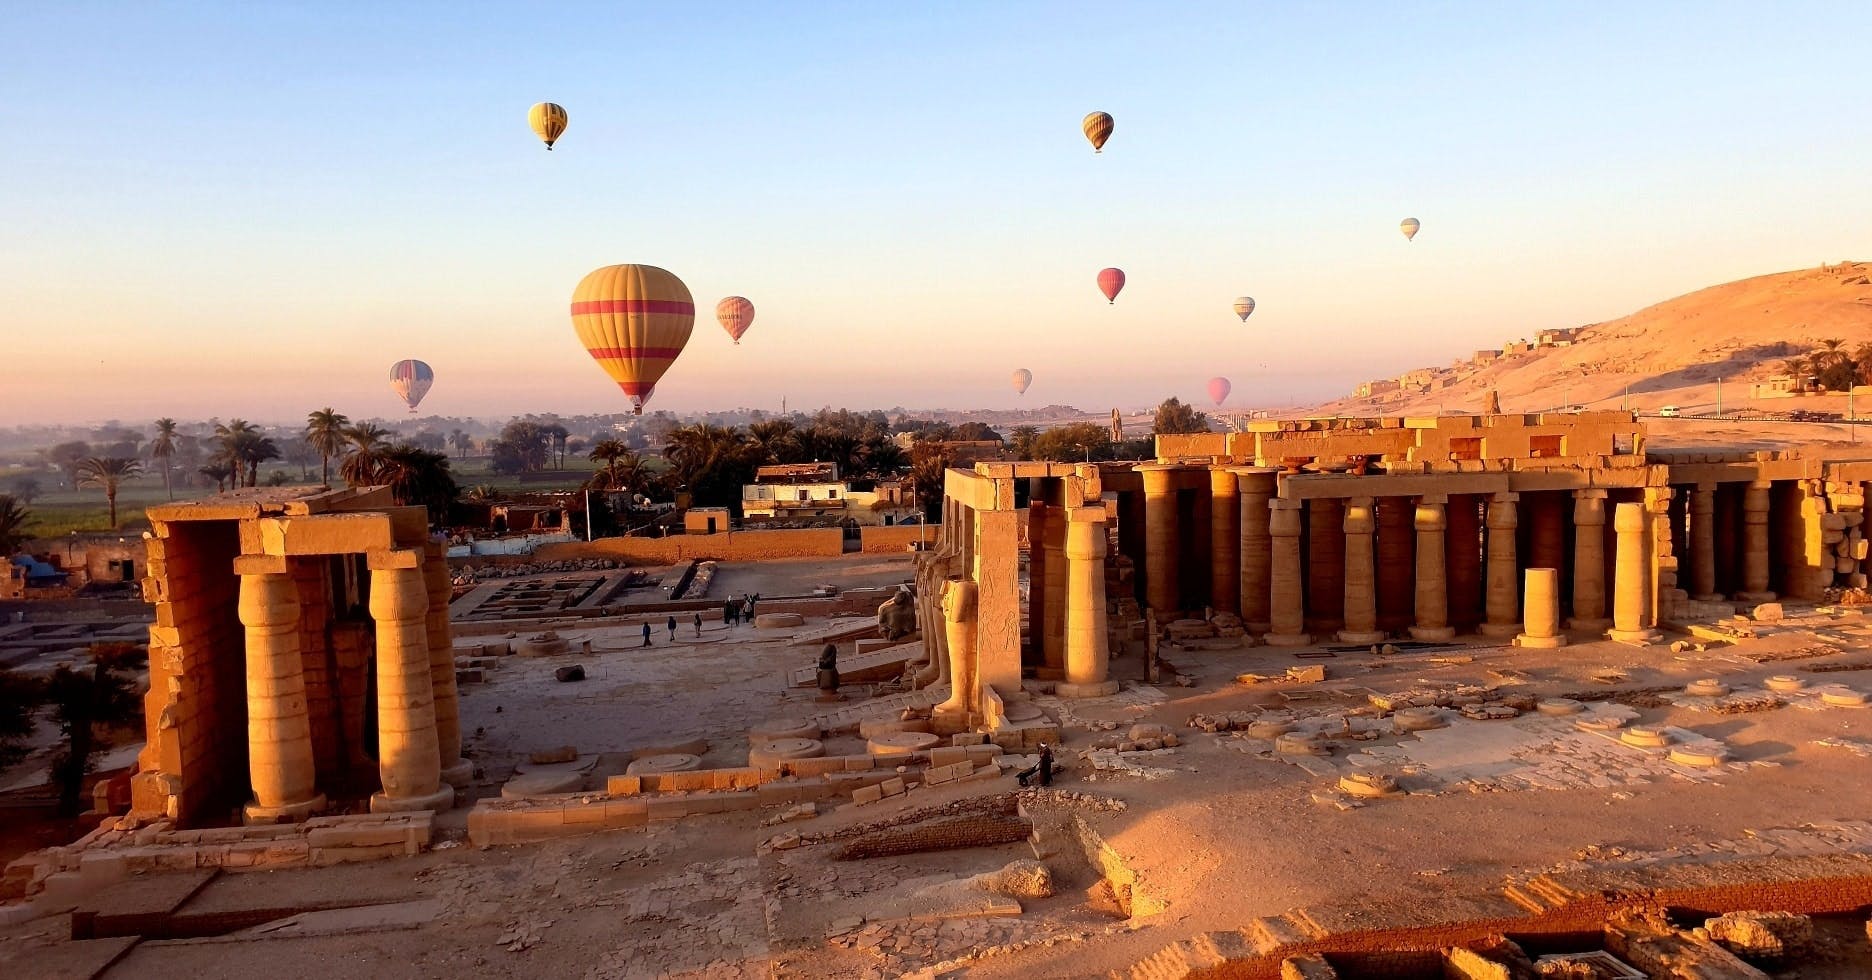 Overnight tour to Luxor highlights with hot air balloon experience from Hurghada Musement